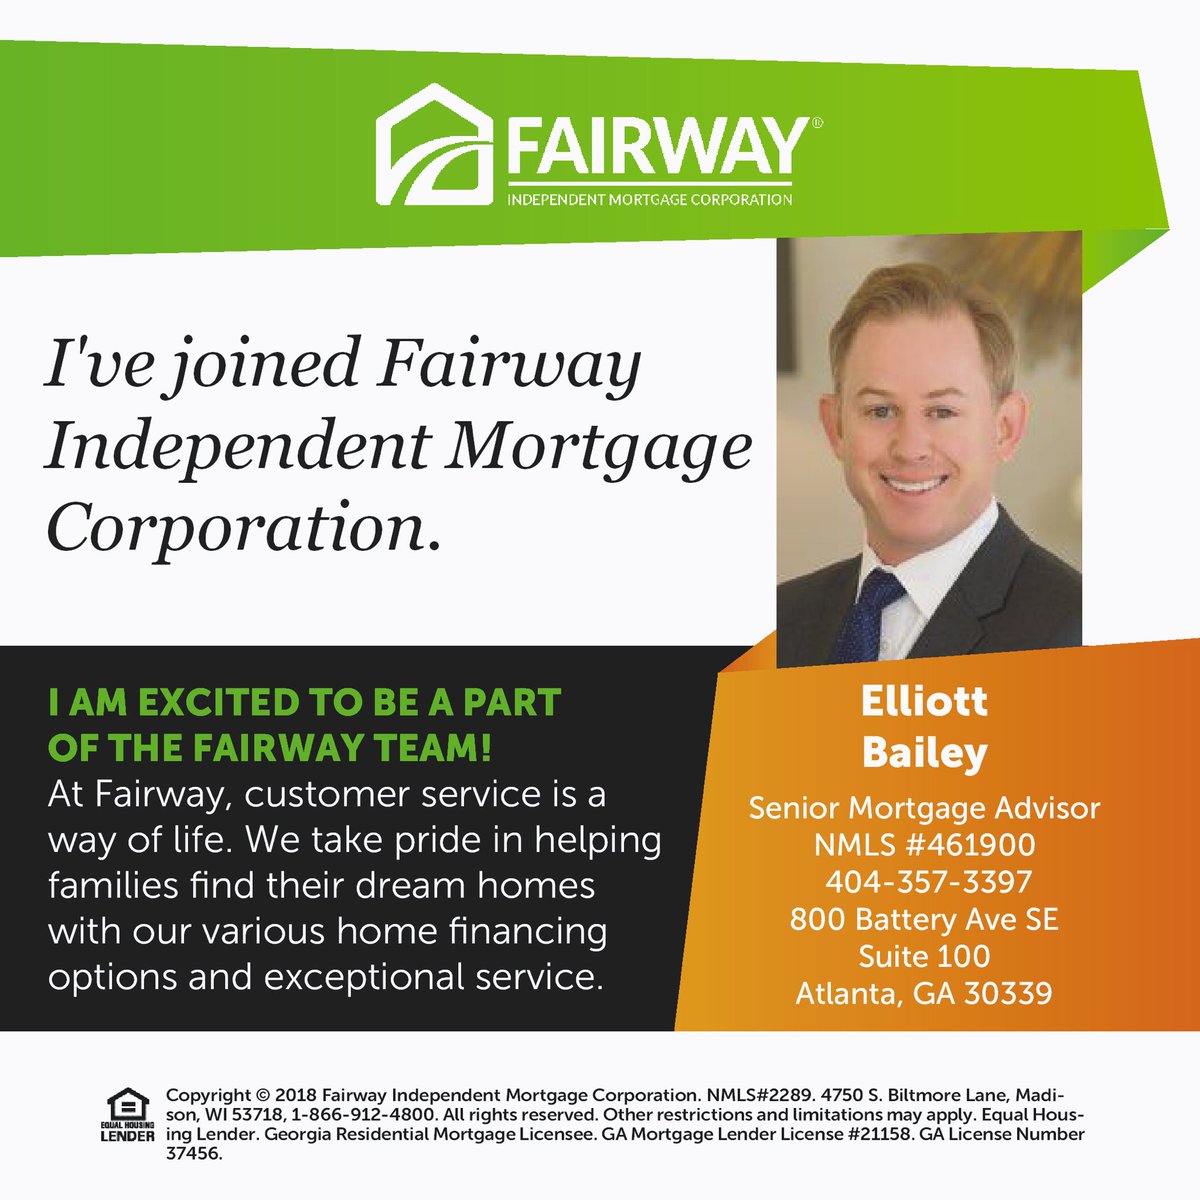 Happy to have joined such a great organization!  #success #fairwayindependentmortgage     #skysthelimit